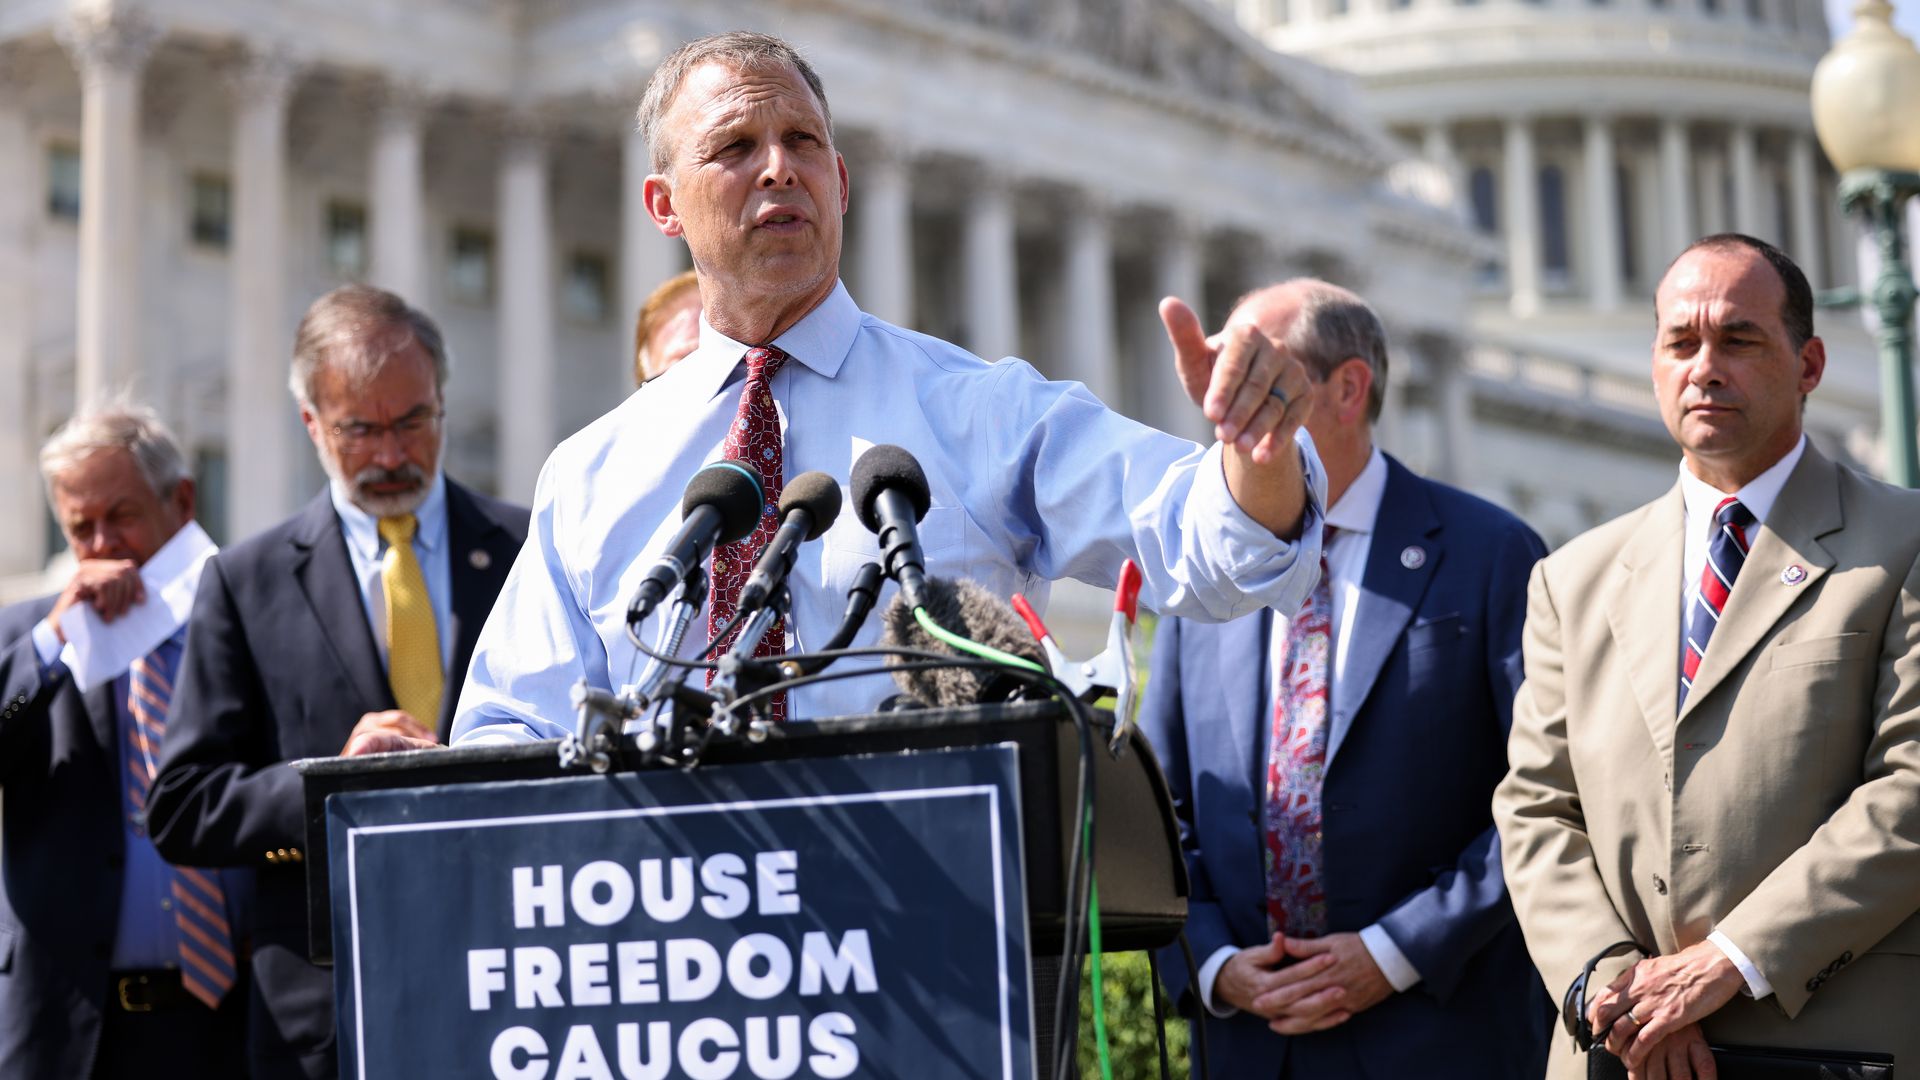 Rep. Scott Perry joined by members of the House Freedom Caucus at an August news conference in Washington, DC.